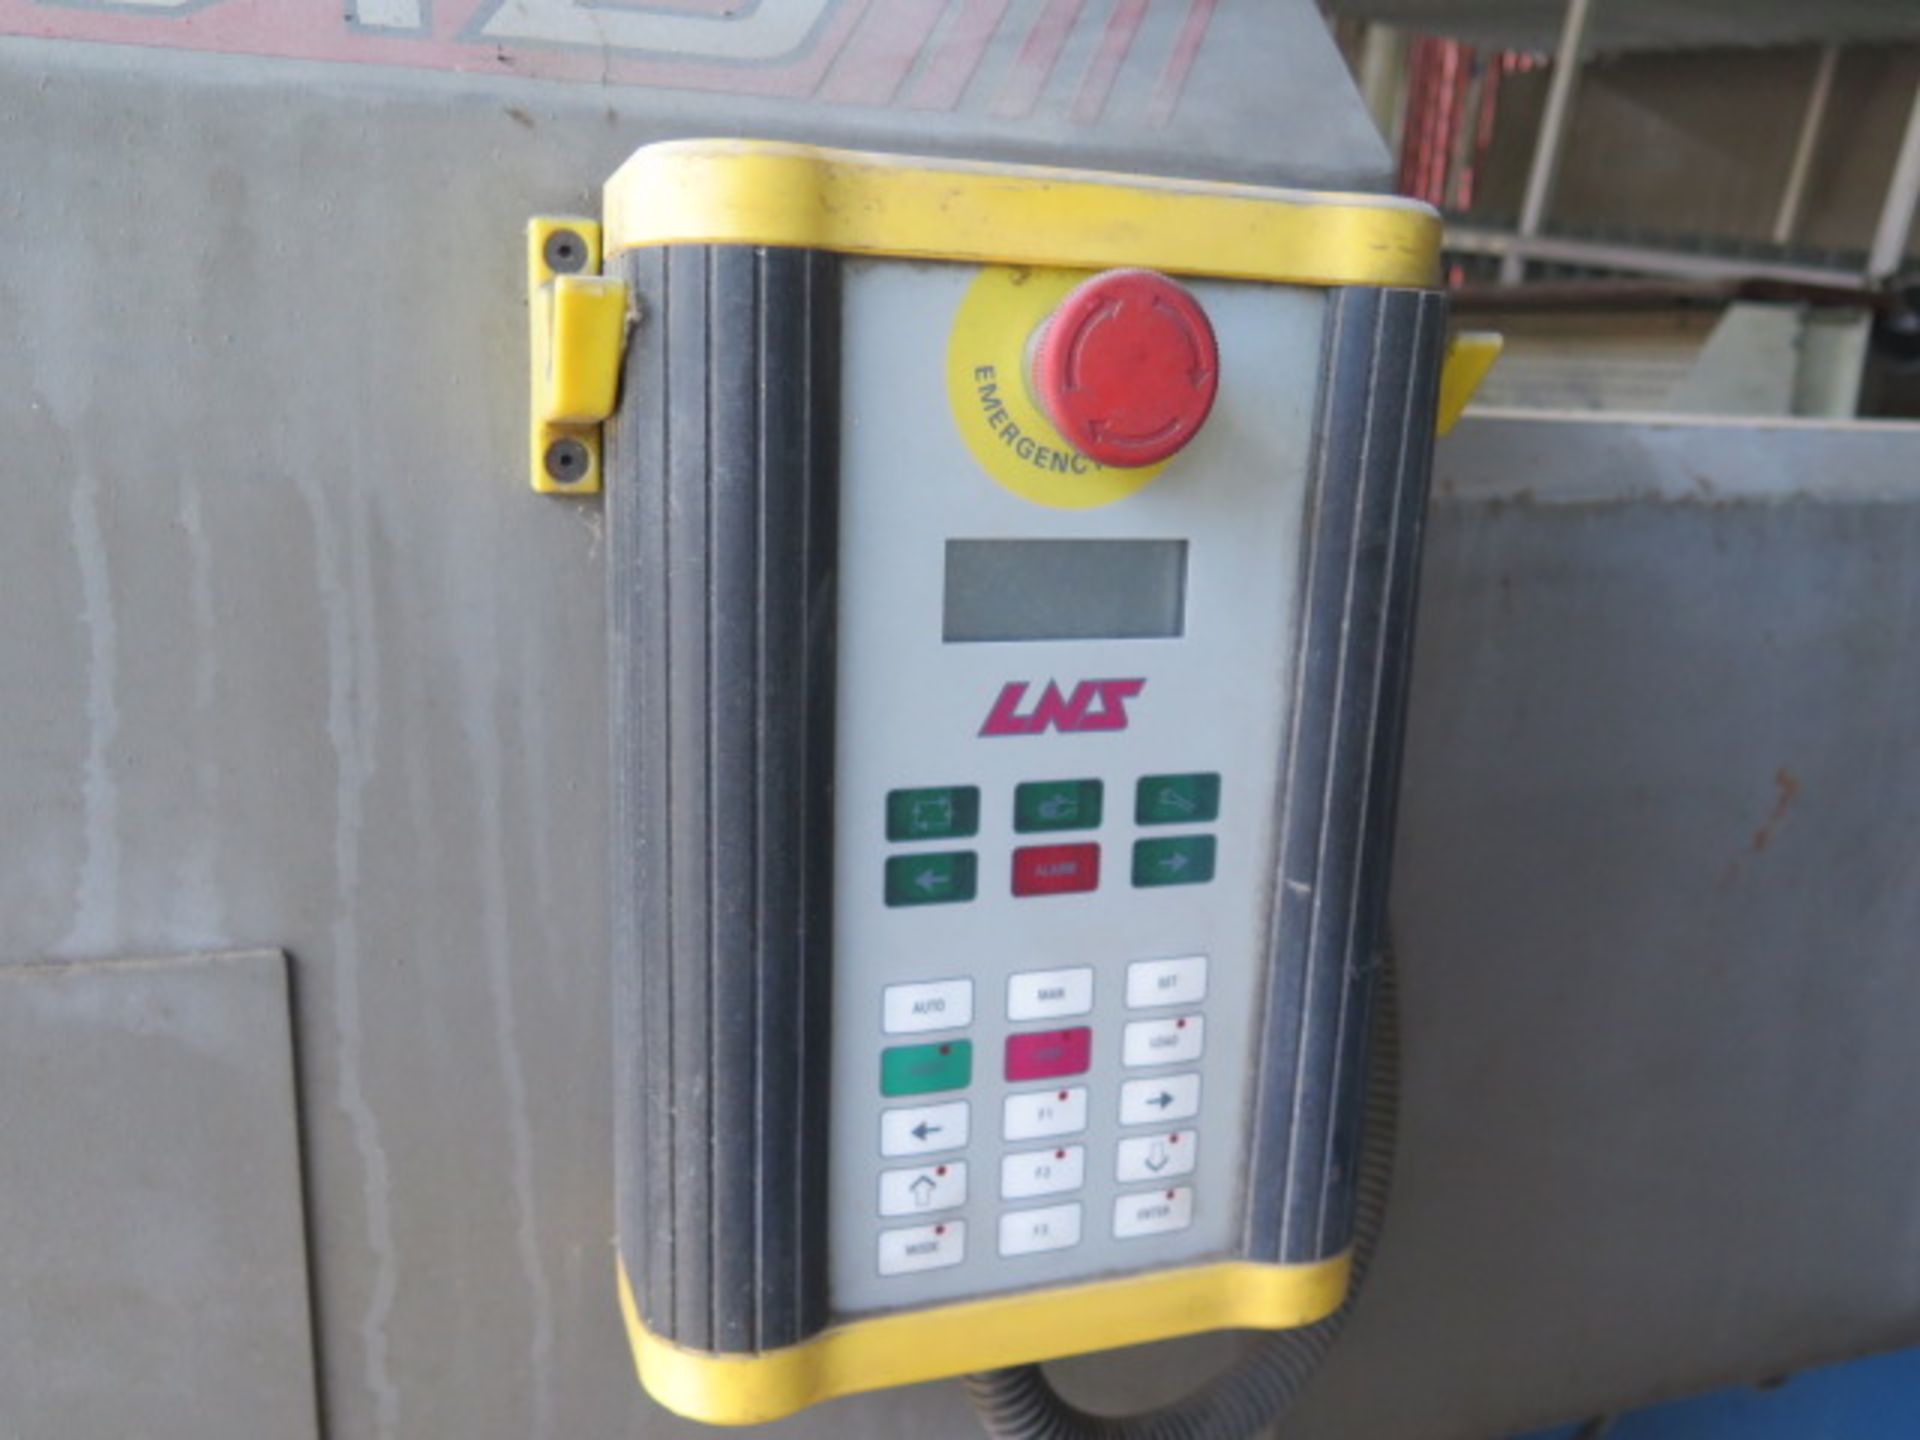 LNS Quick Load Automatic Bar Loader / Feeder (SOLD AS-IS - NO WARRANTY) (Located at 2091 Fortune Dr. - Image 4 of 6